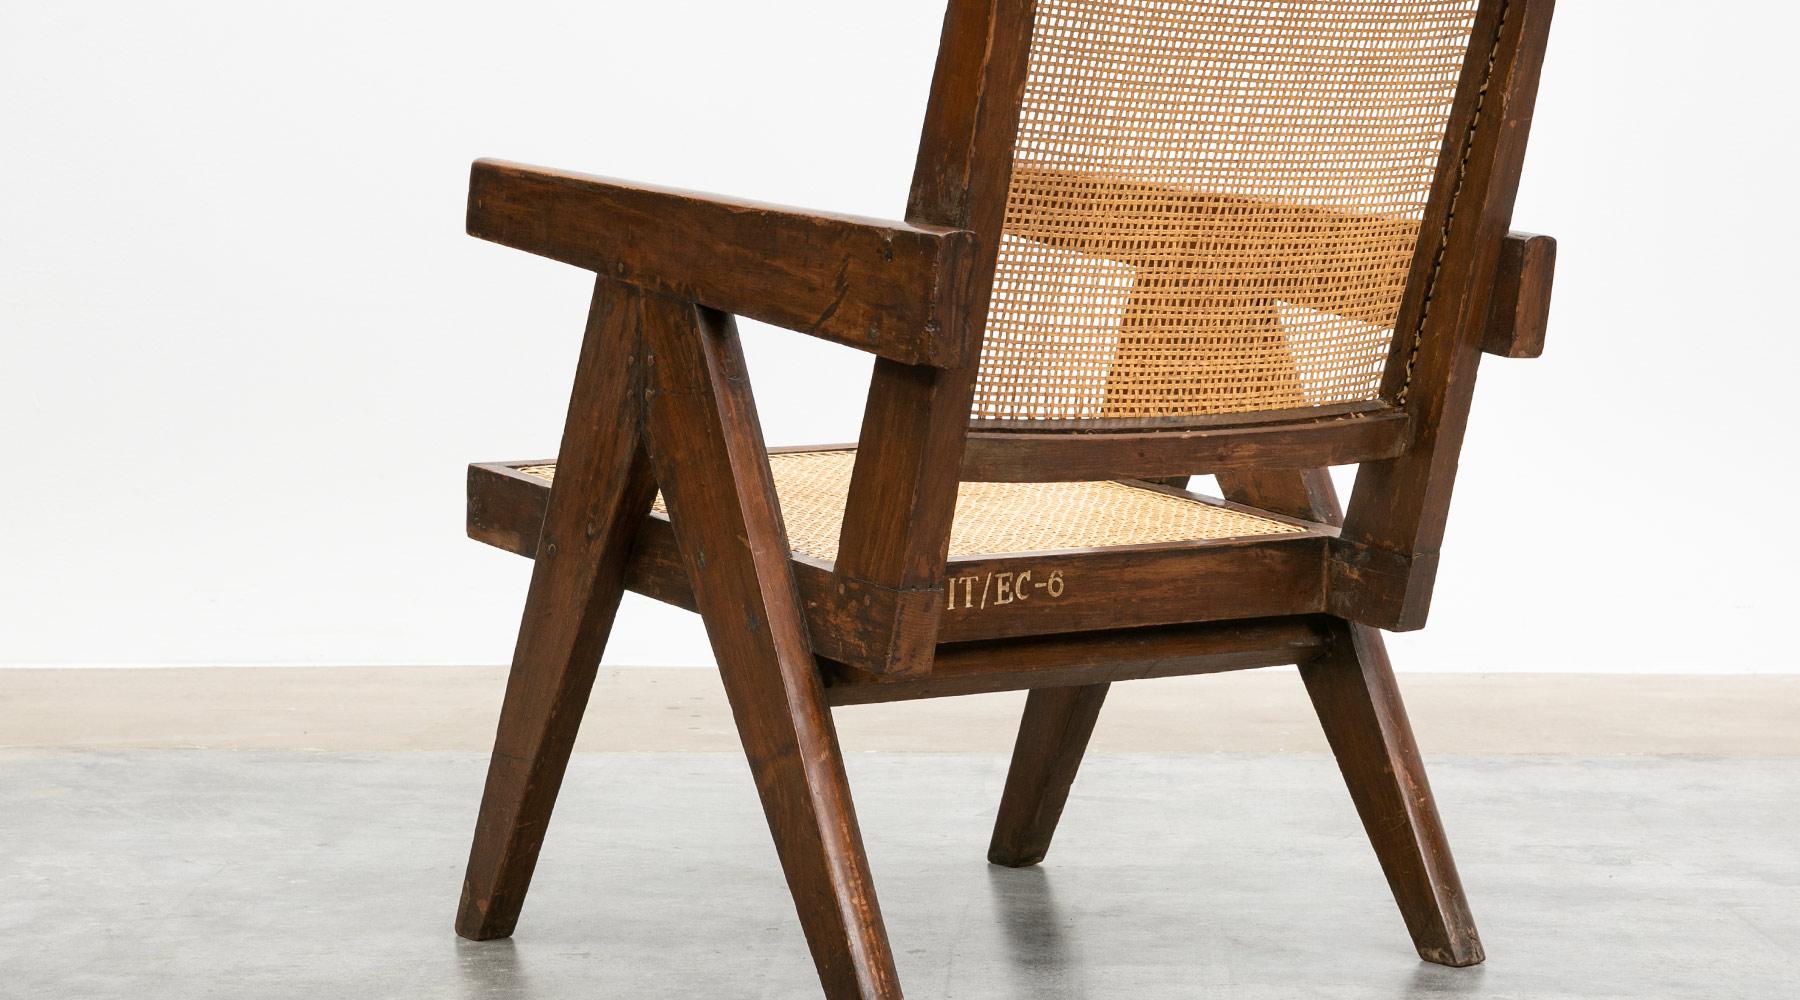 Single 1950s Brown Wooden Teak and Cane Lounge Chair by Pierre Jeanneret For Sale 4